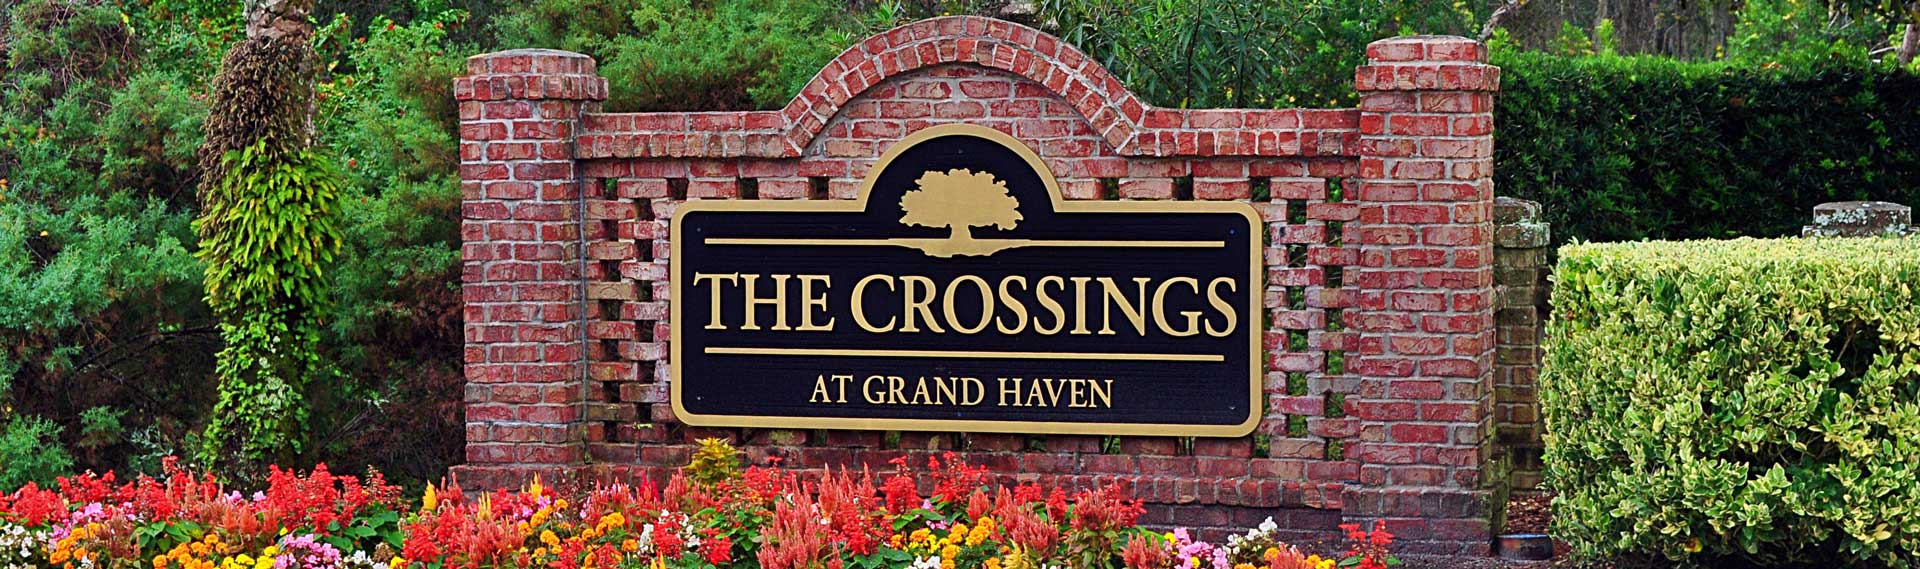 The Crossings at Grand Haven Monument Sign